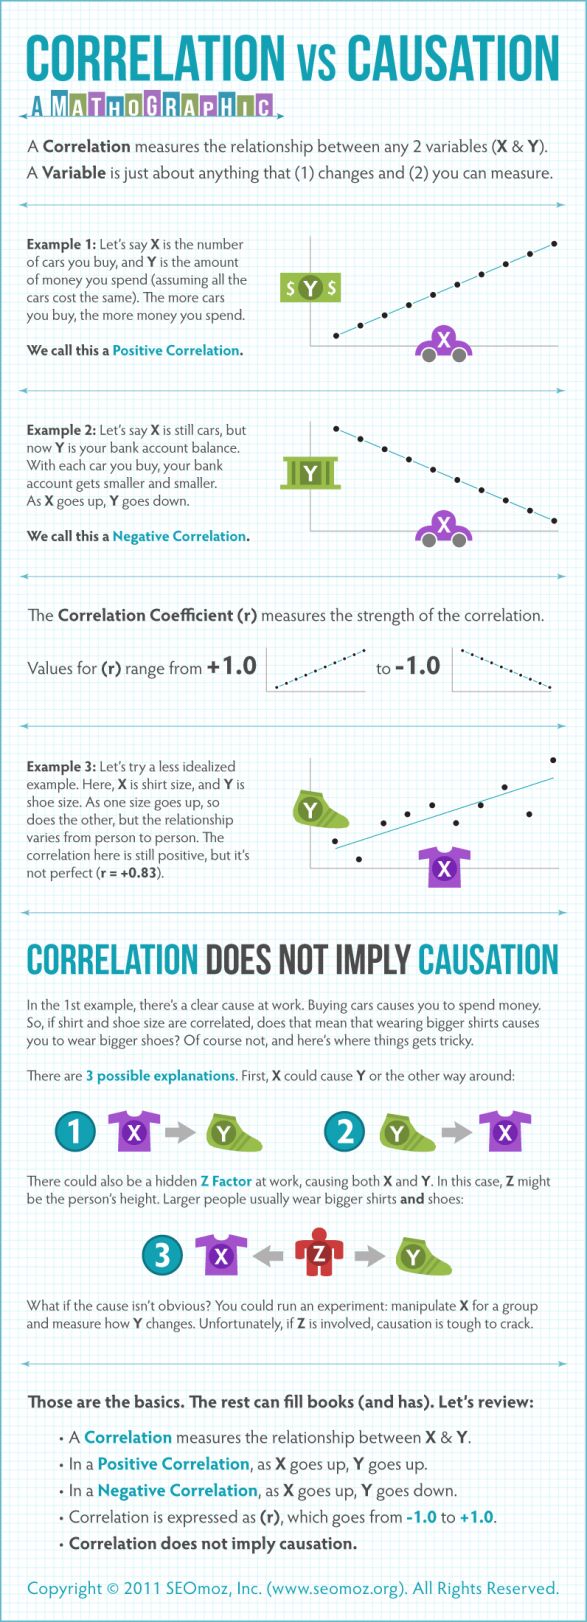 correlation does not imply causation example